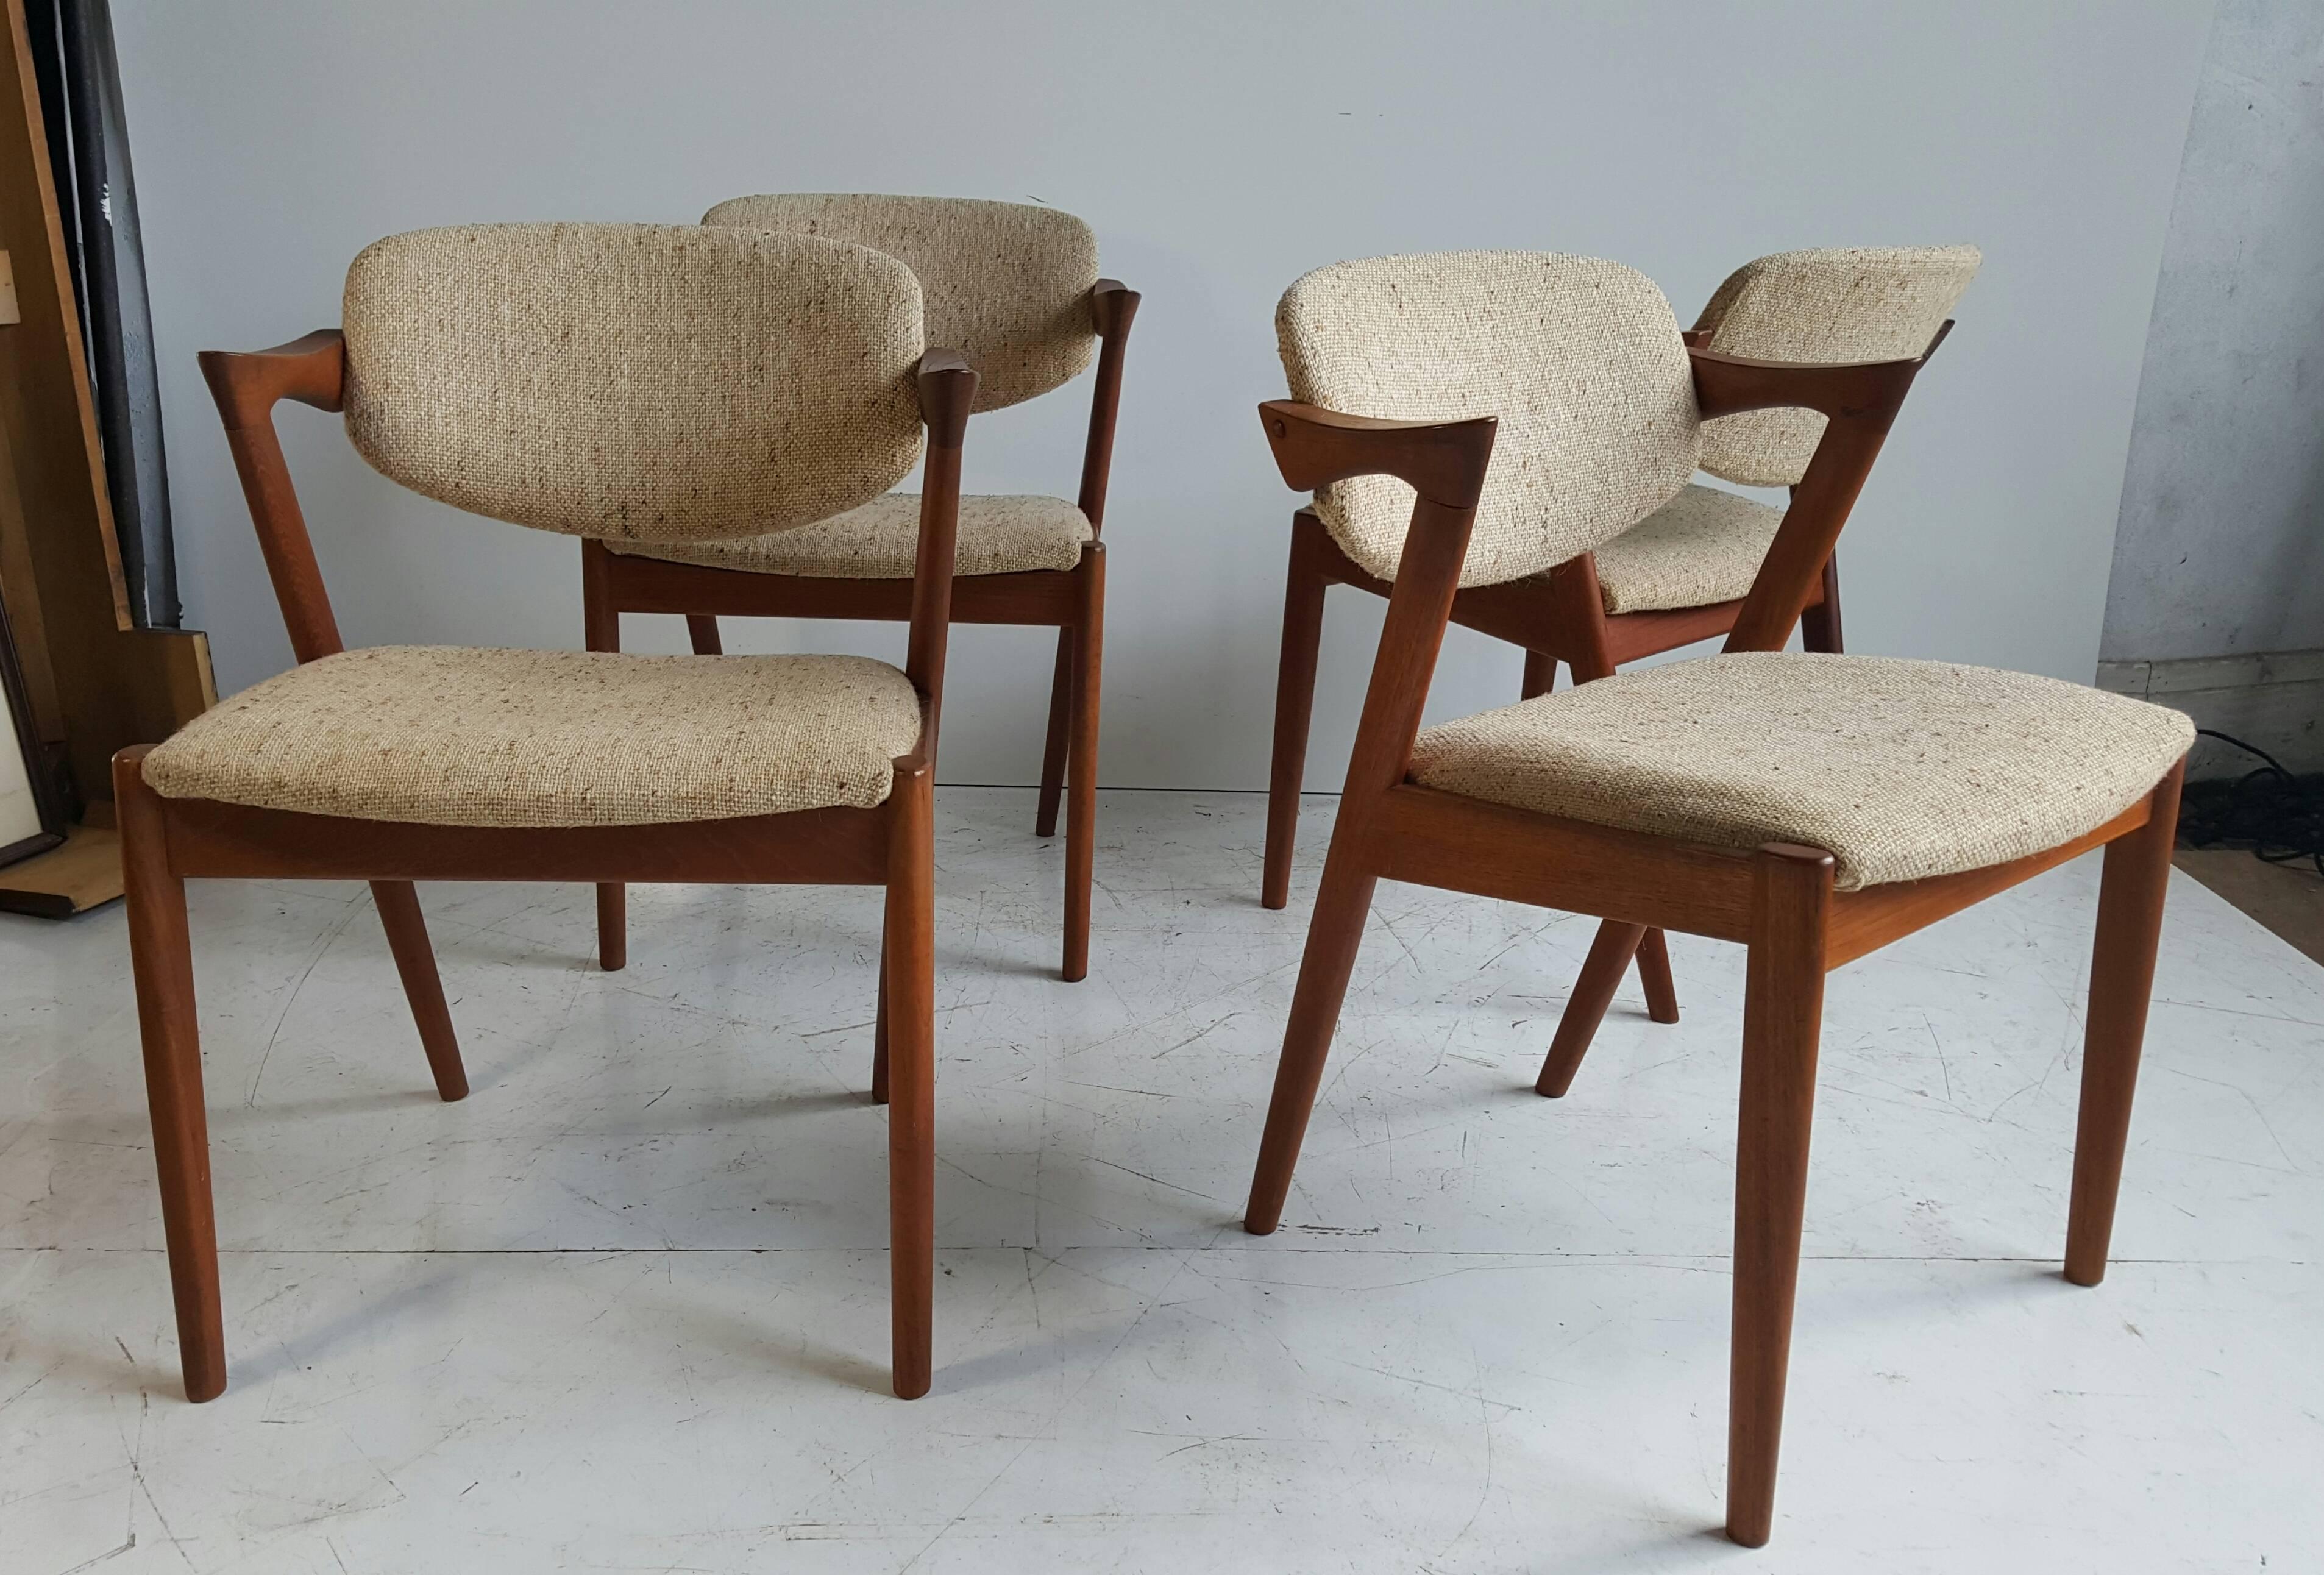 Iconic Danish modern armchairs in original upholstery. Designed in 1956-1957 by Kai Kristiansen. Manufactured at Schou Andersen's factory. Wonderful teakwood frames sturdy, no wobble and superior quality. Chairs retain original wool fabric seats and